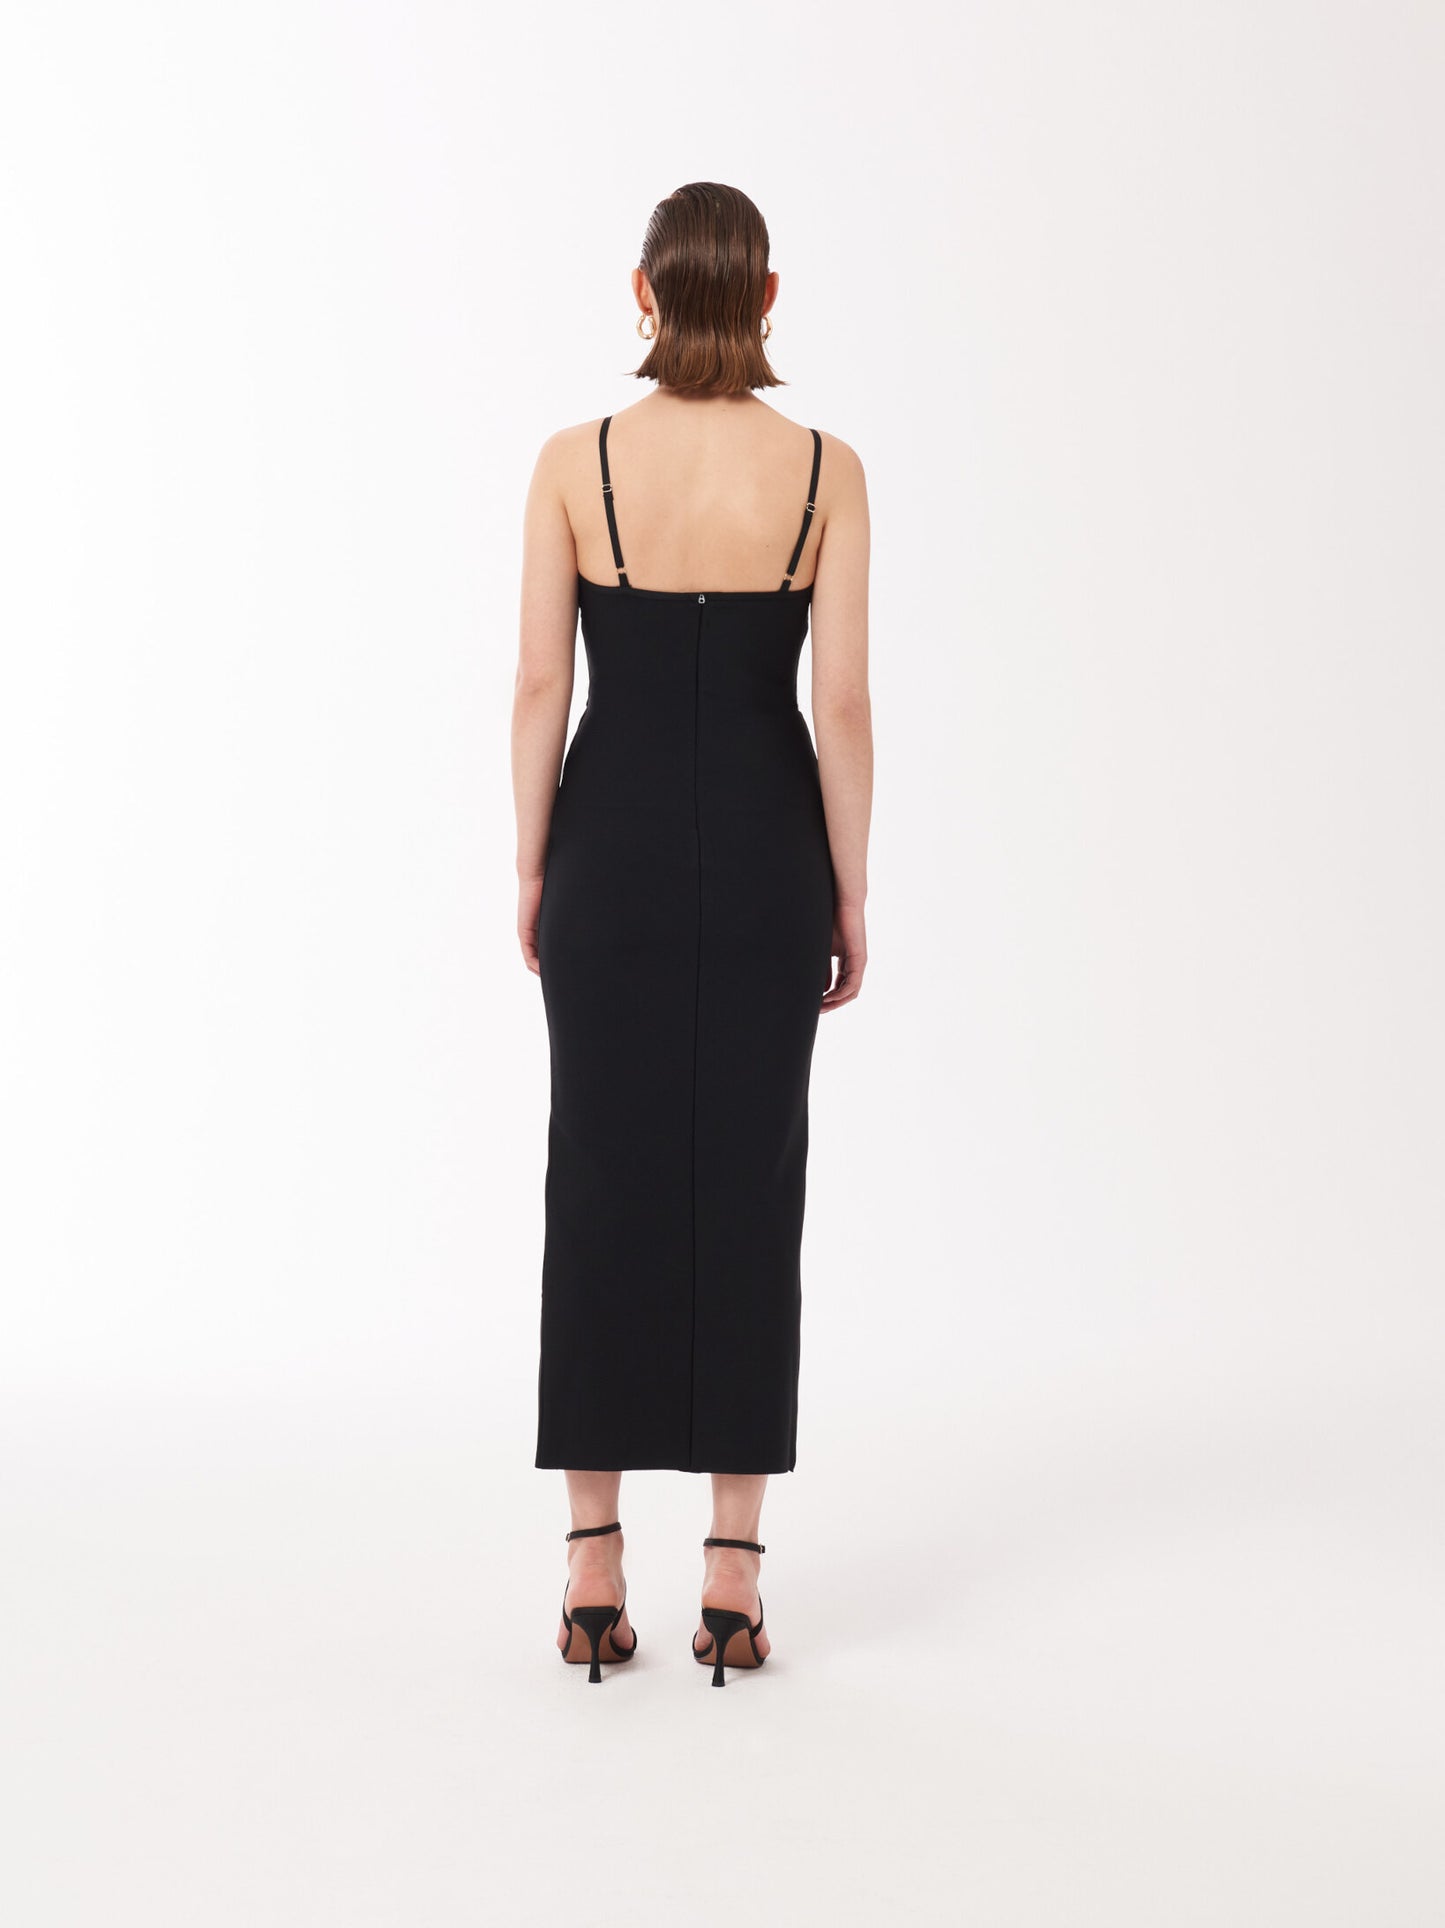 Bustier Tulle-paneled maxi dress in black from Sour Figs